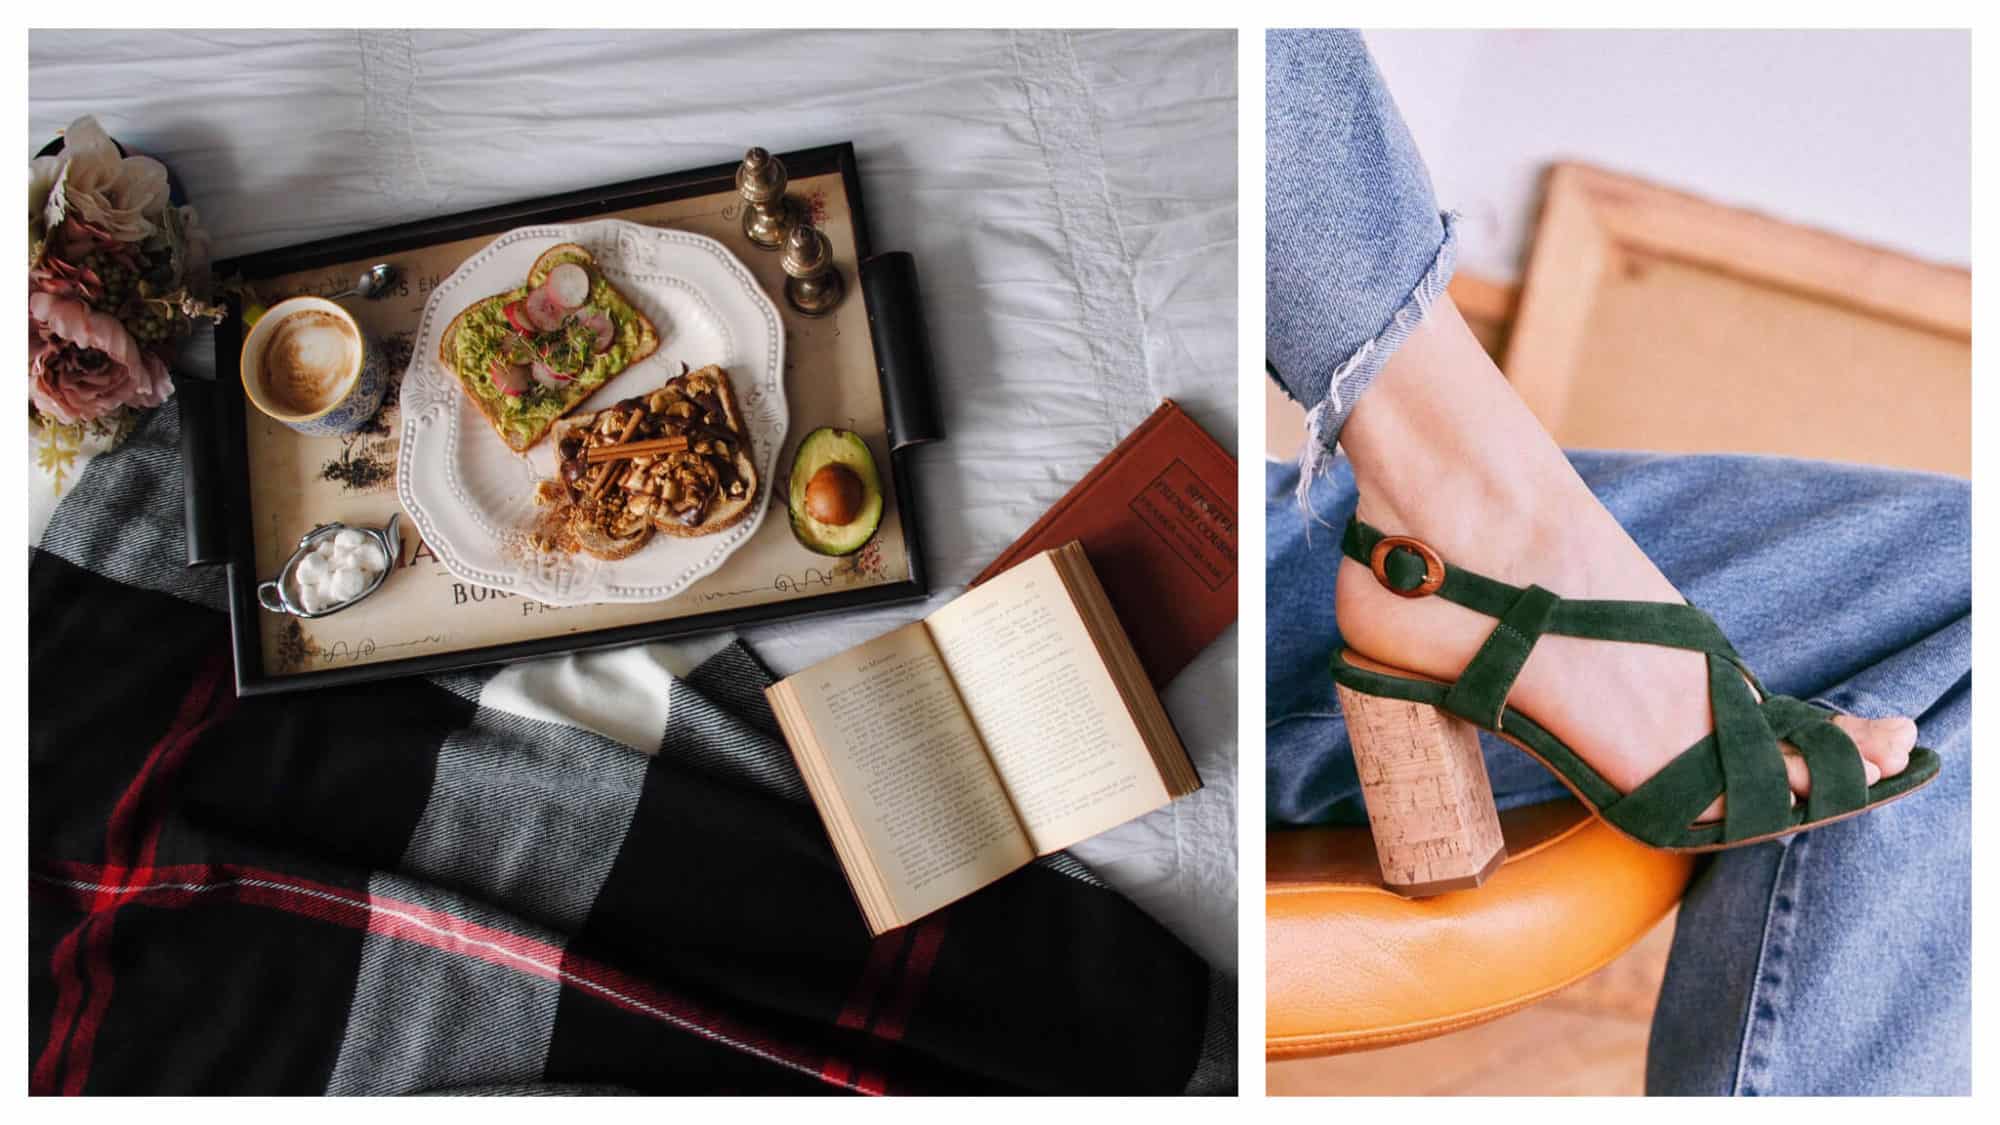 Left, a tray with a hearty breakfast and an open book, the perfect way to enjoy a day of confinement. Right, a pair of Sézane green velvet and cork-heel shoes to shop to remind you of Paris without leaving home.